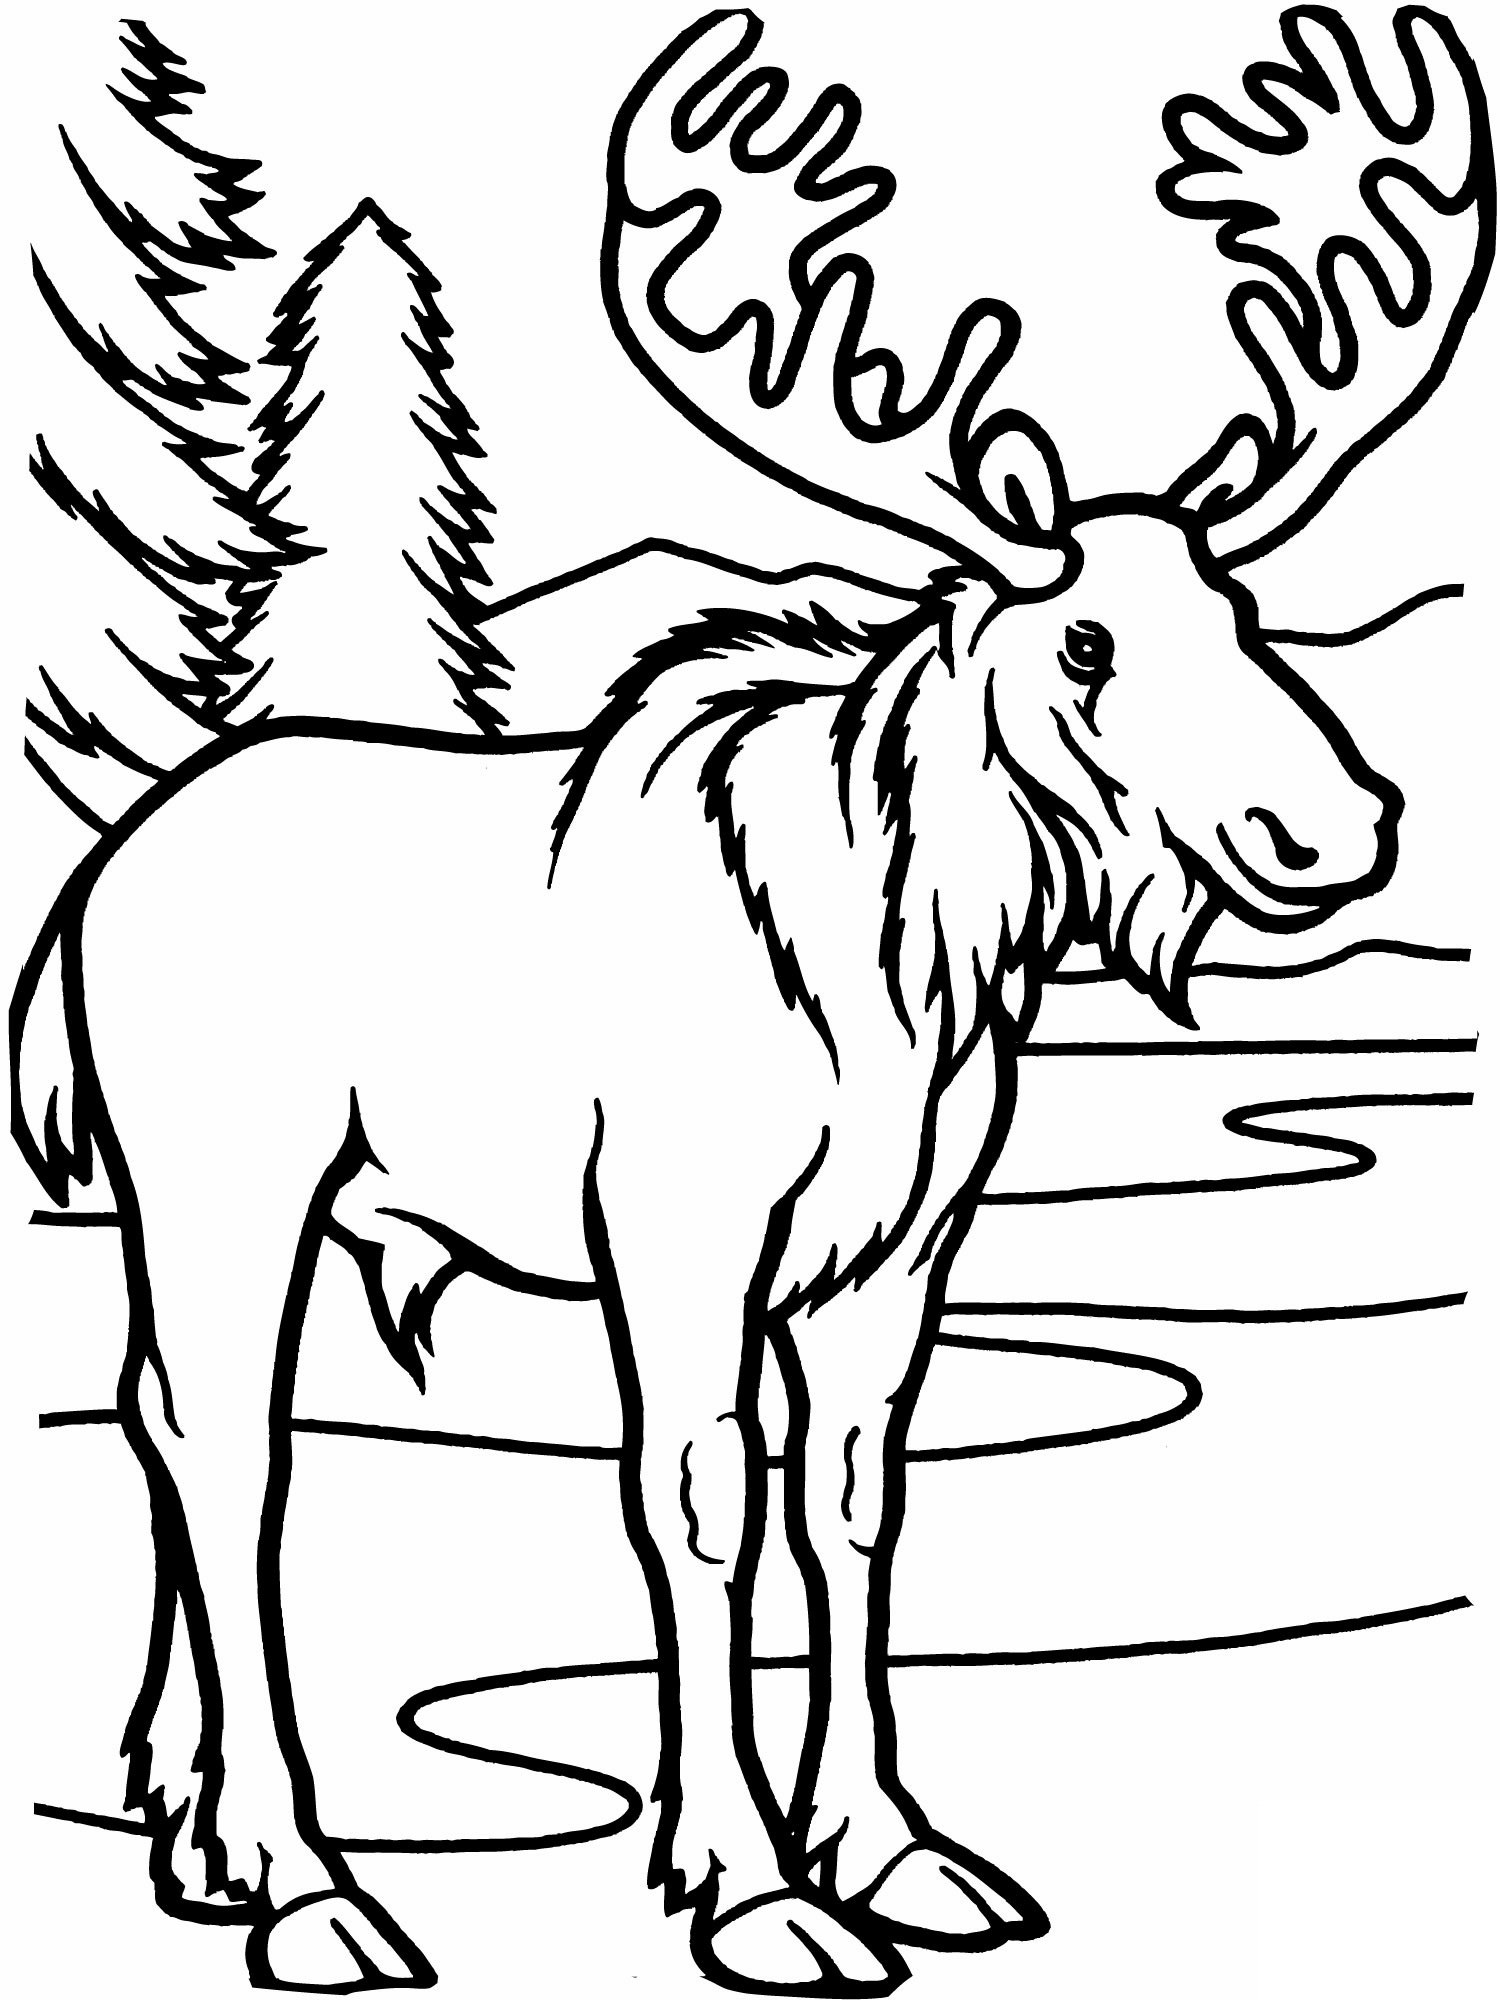 21-printable-dog-coloring-pages-animals-pdfs-print-color-craft